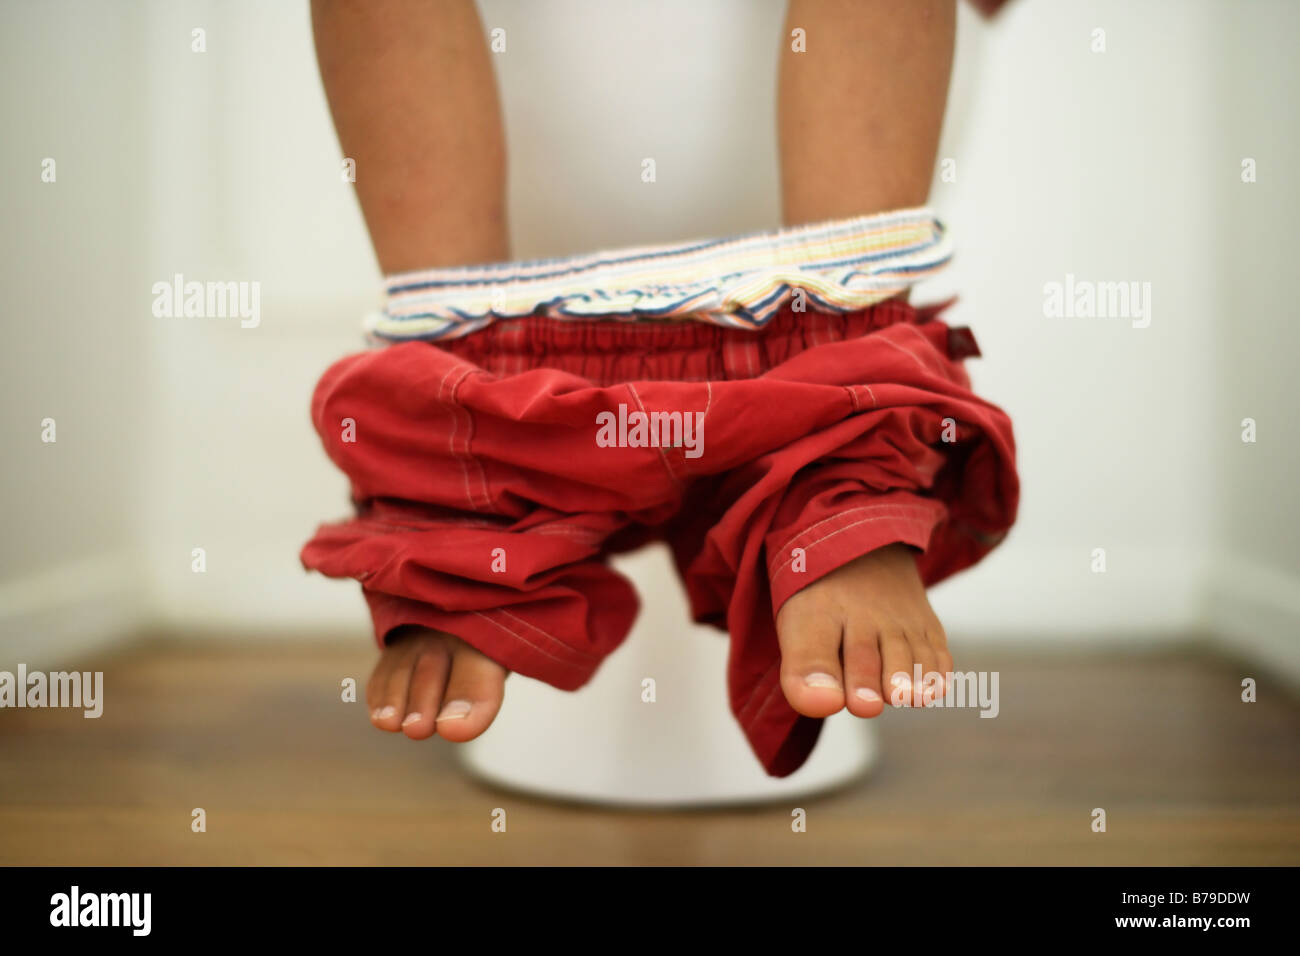 Boy sits on toilet with trousers round ankles Stock Photo